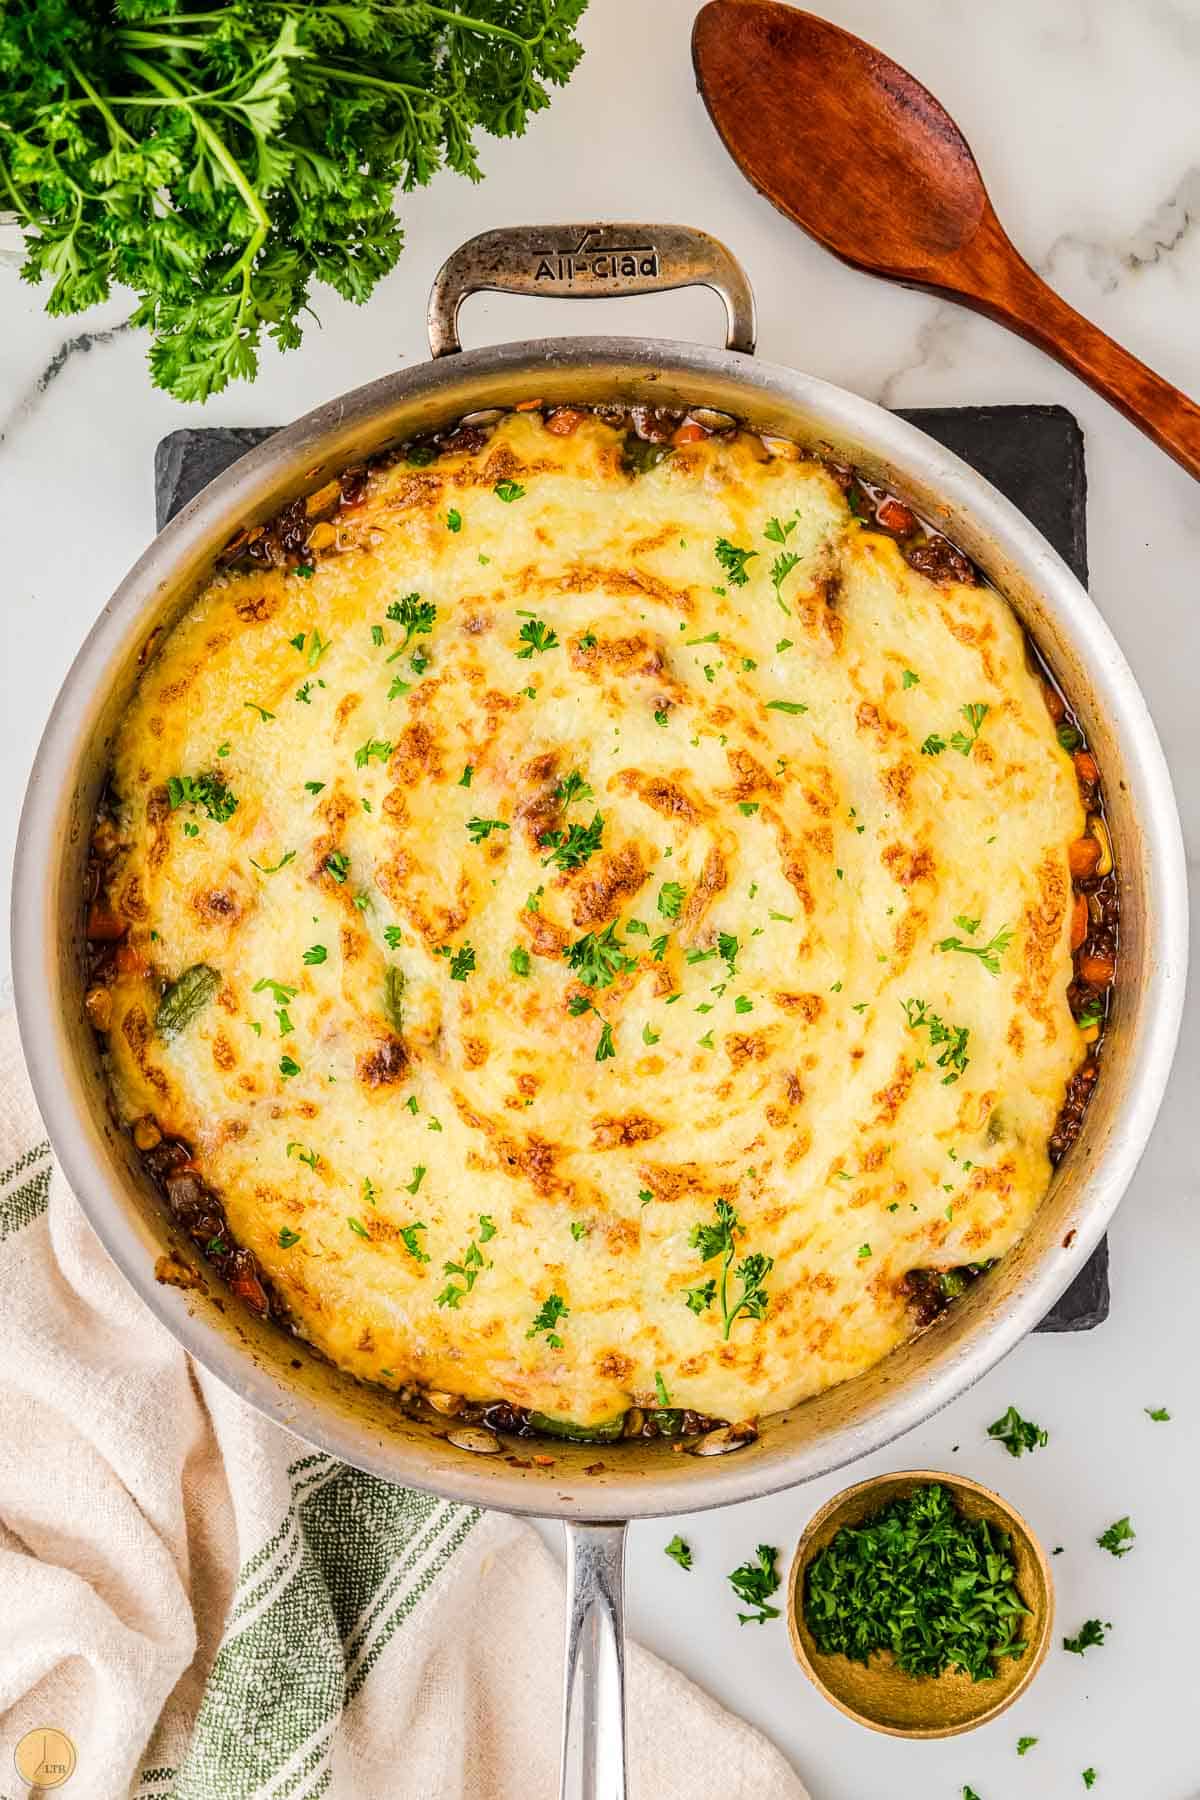 traditional dish for a cold winter night is skillet shepherd's pie